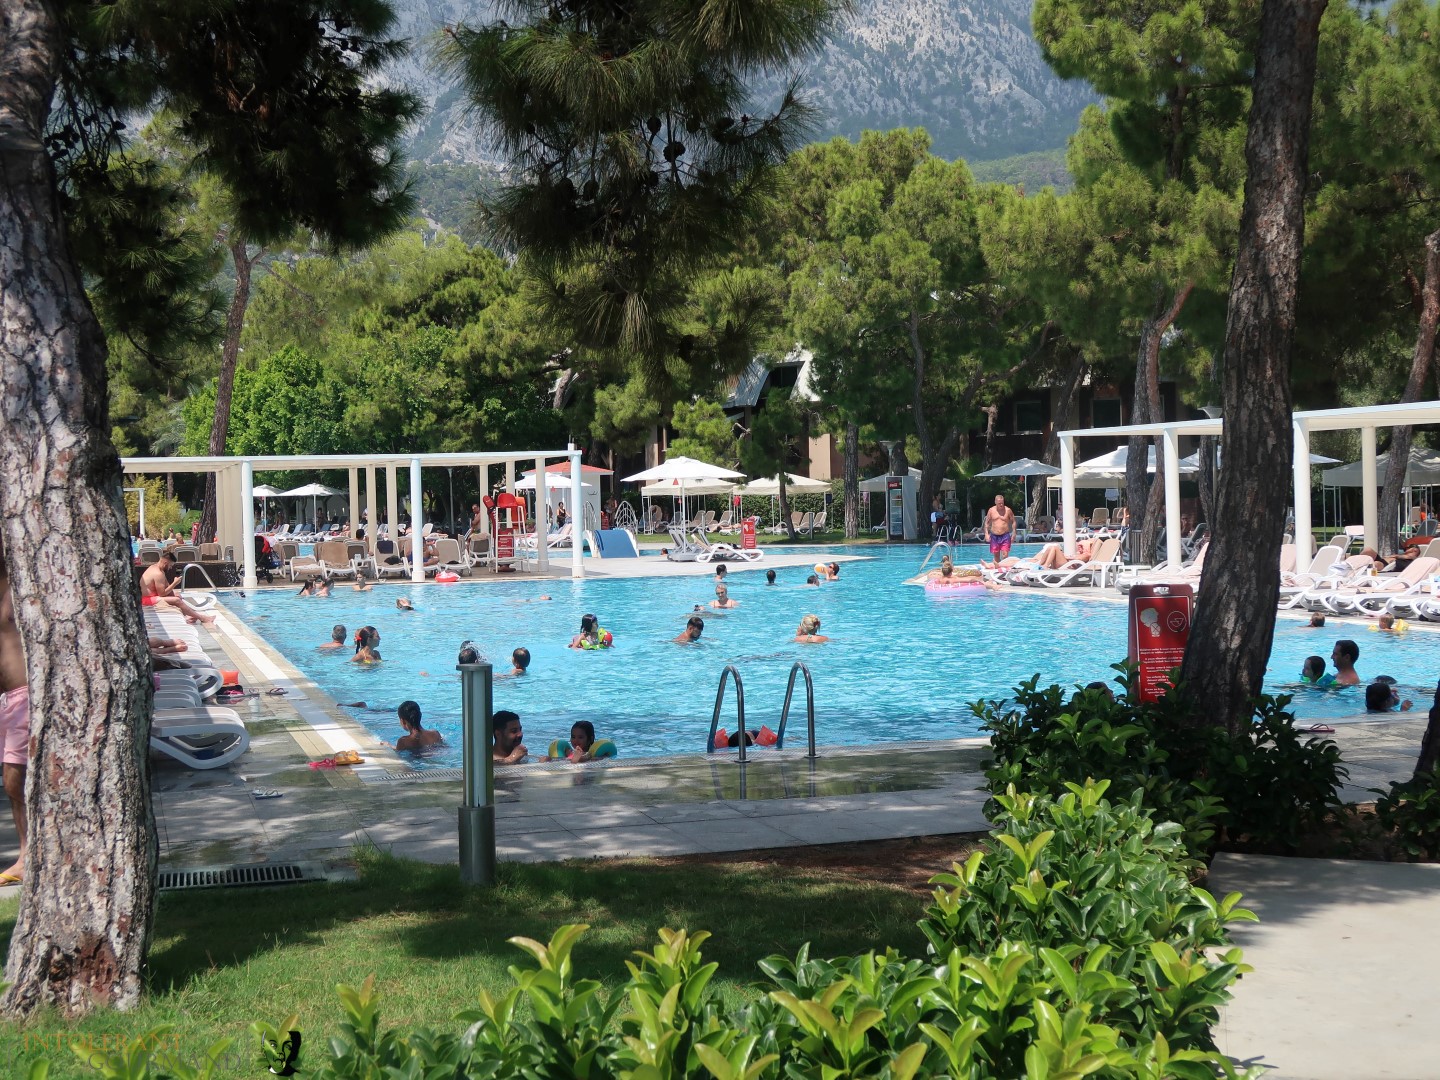 Rixos Sungate Kemer Antalya with Jet 2 Holidays - swimming pool in the background, surrounded by trees, and very sunny. www.intolerantgourmand.com